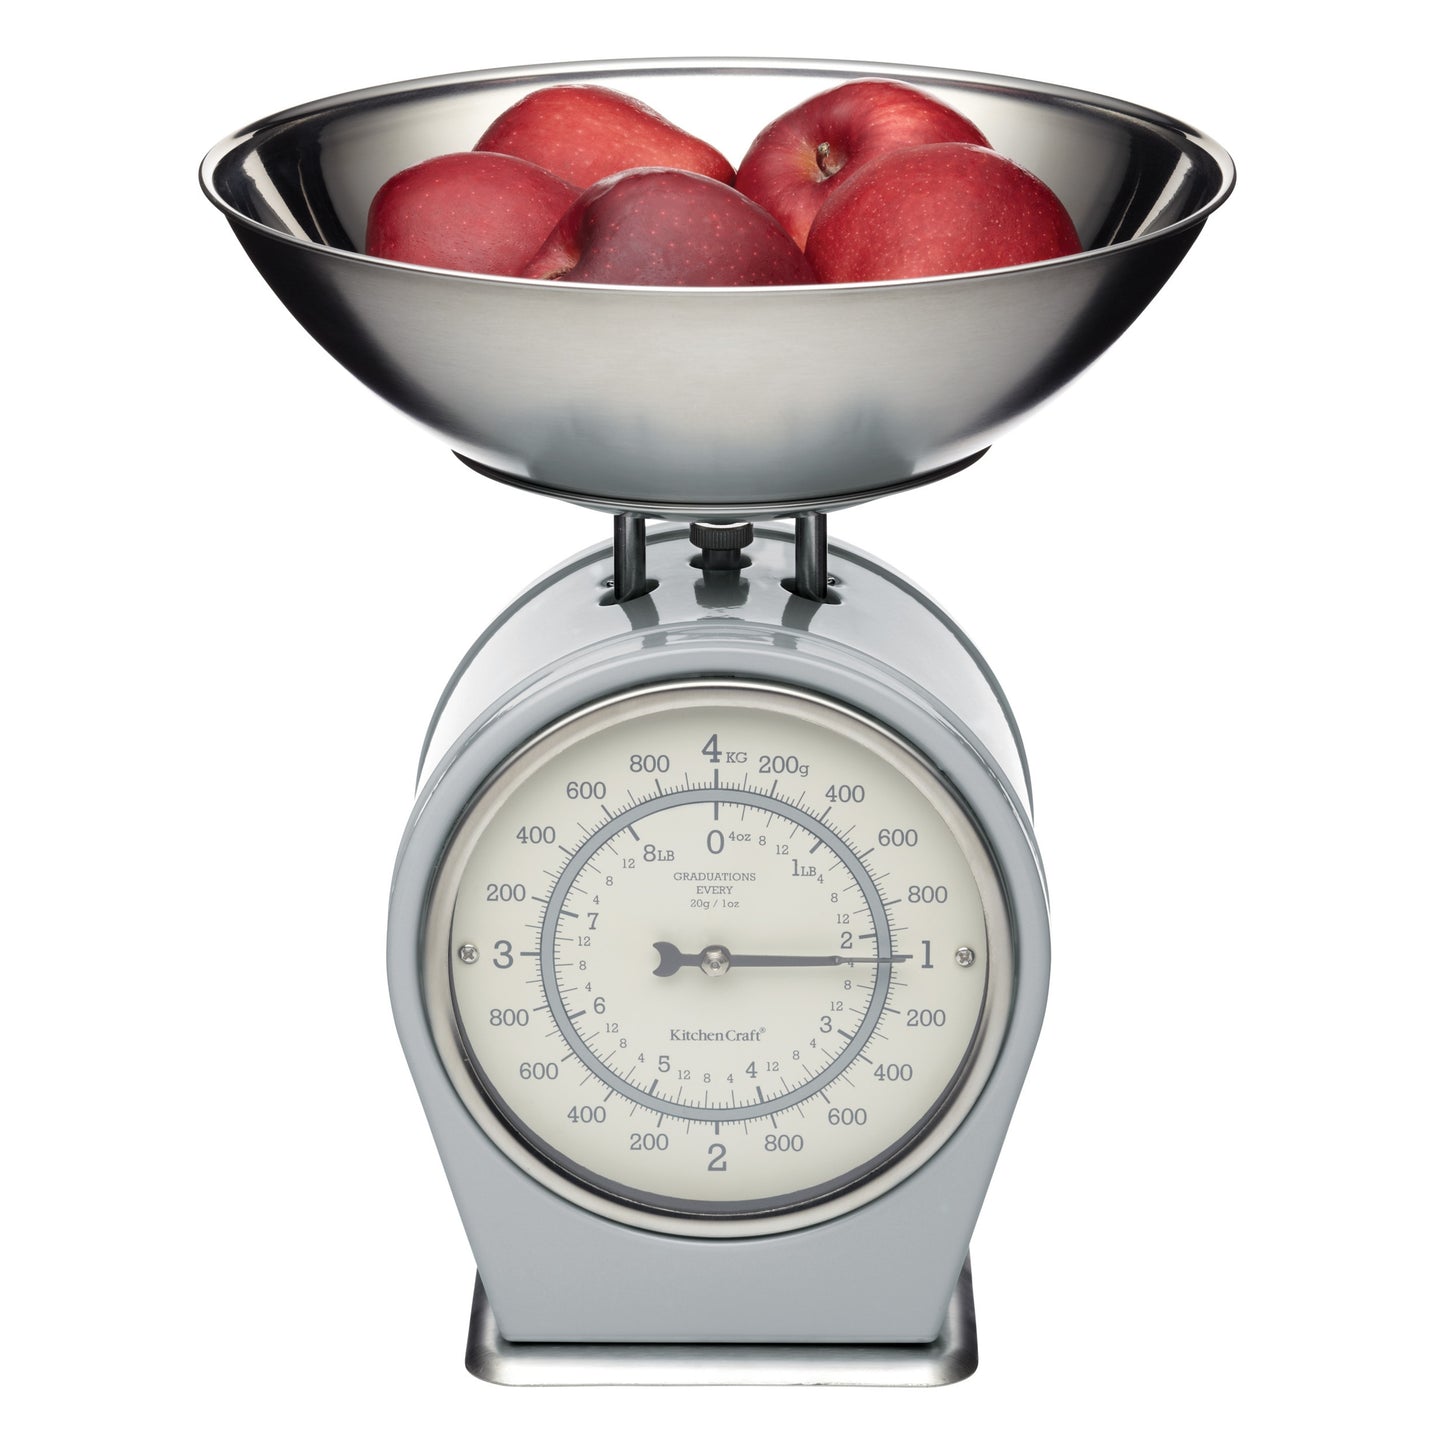 Vintage Style Mechanical Kitchen Scales - French Grey